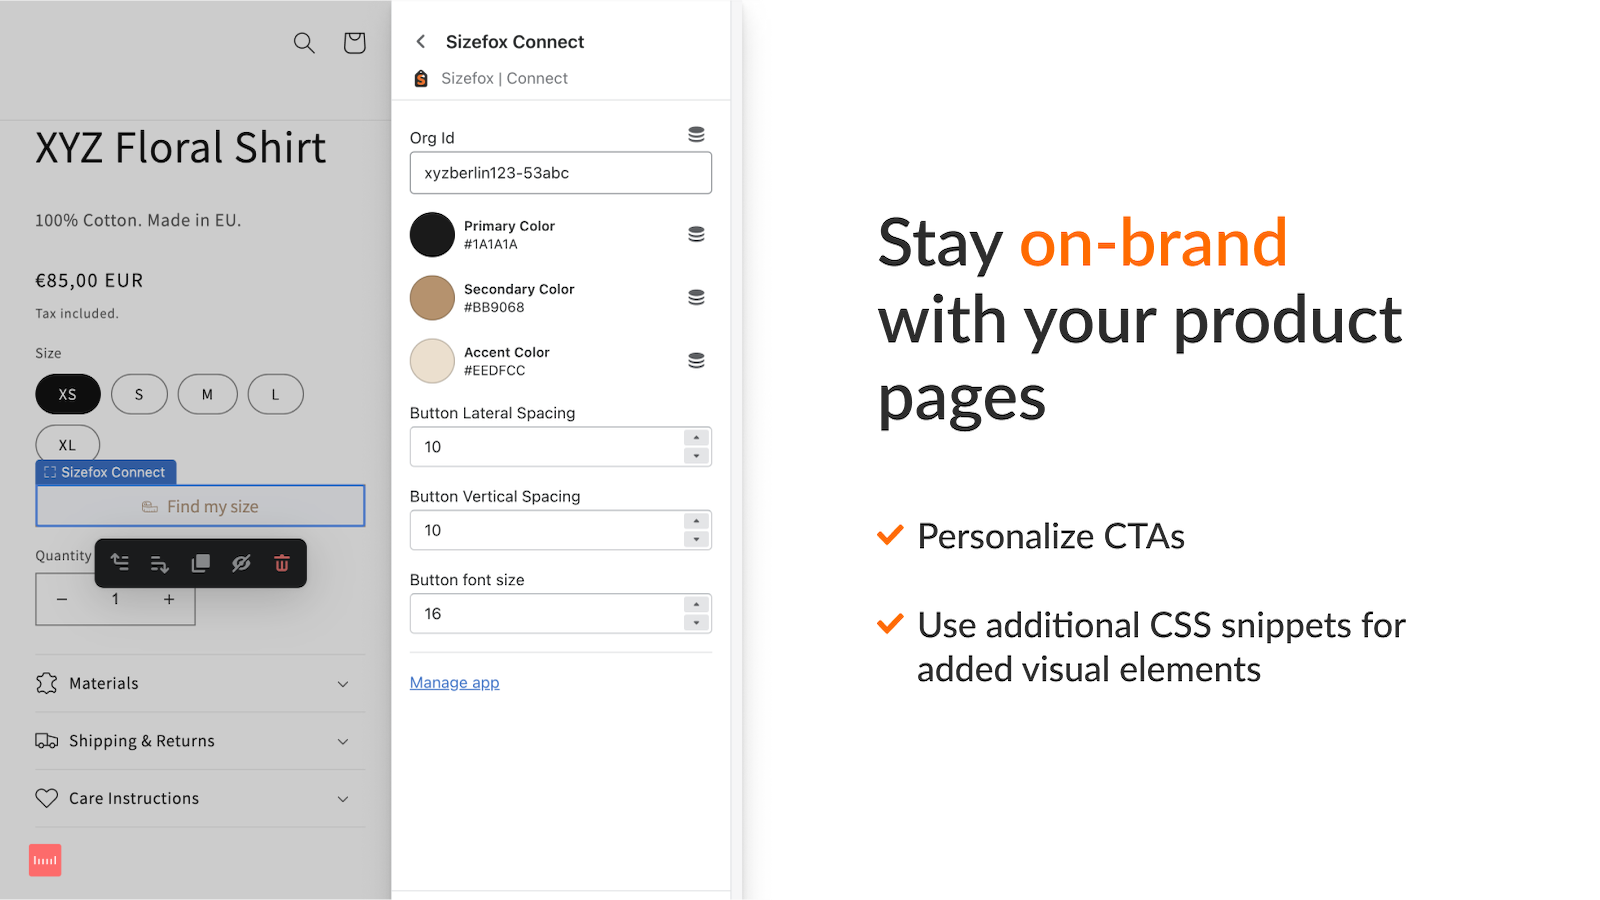 Stay on-brand with your product pages with personalized CTAs